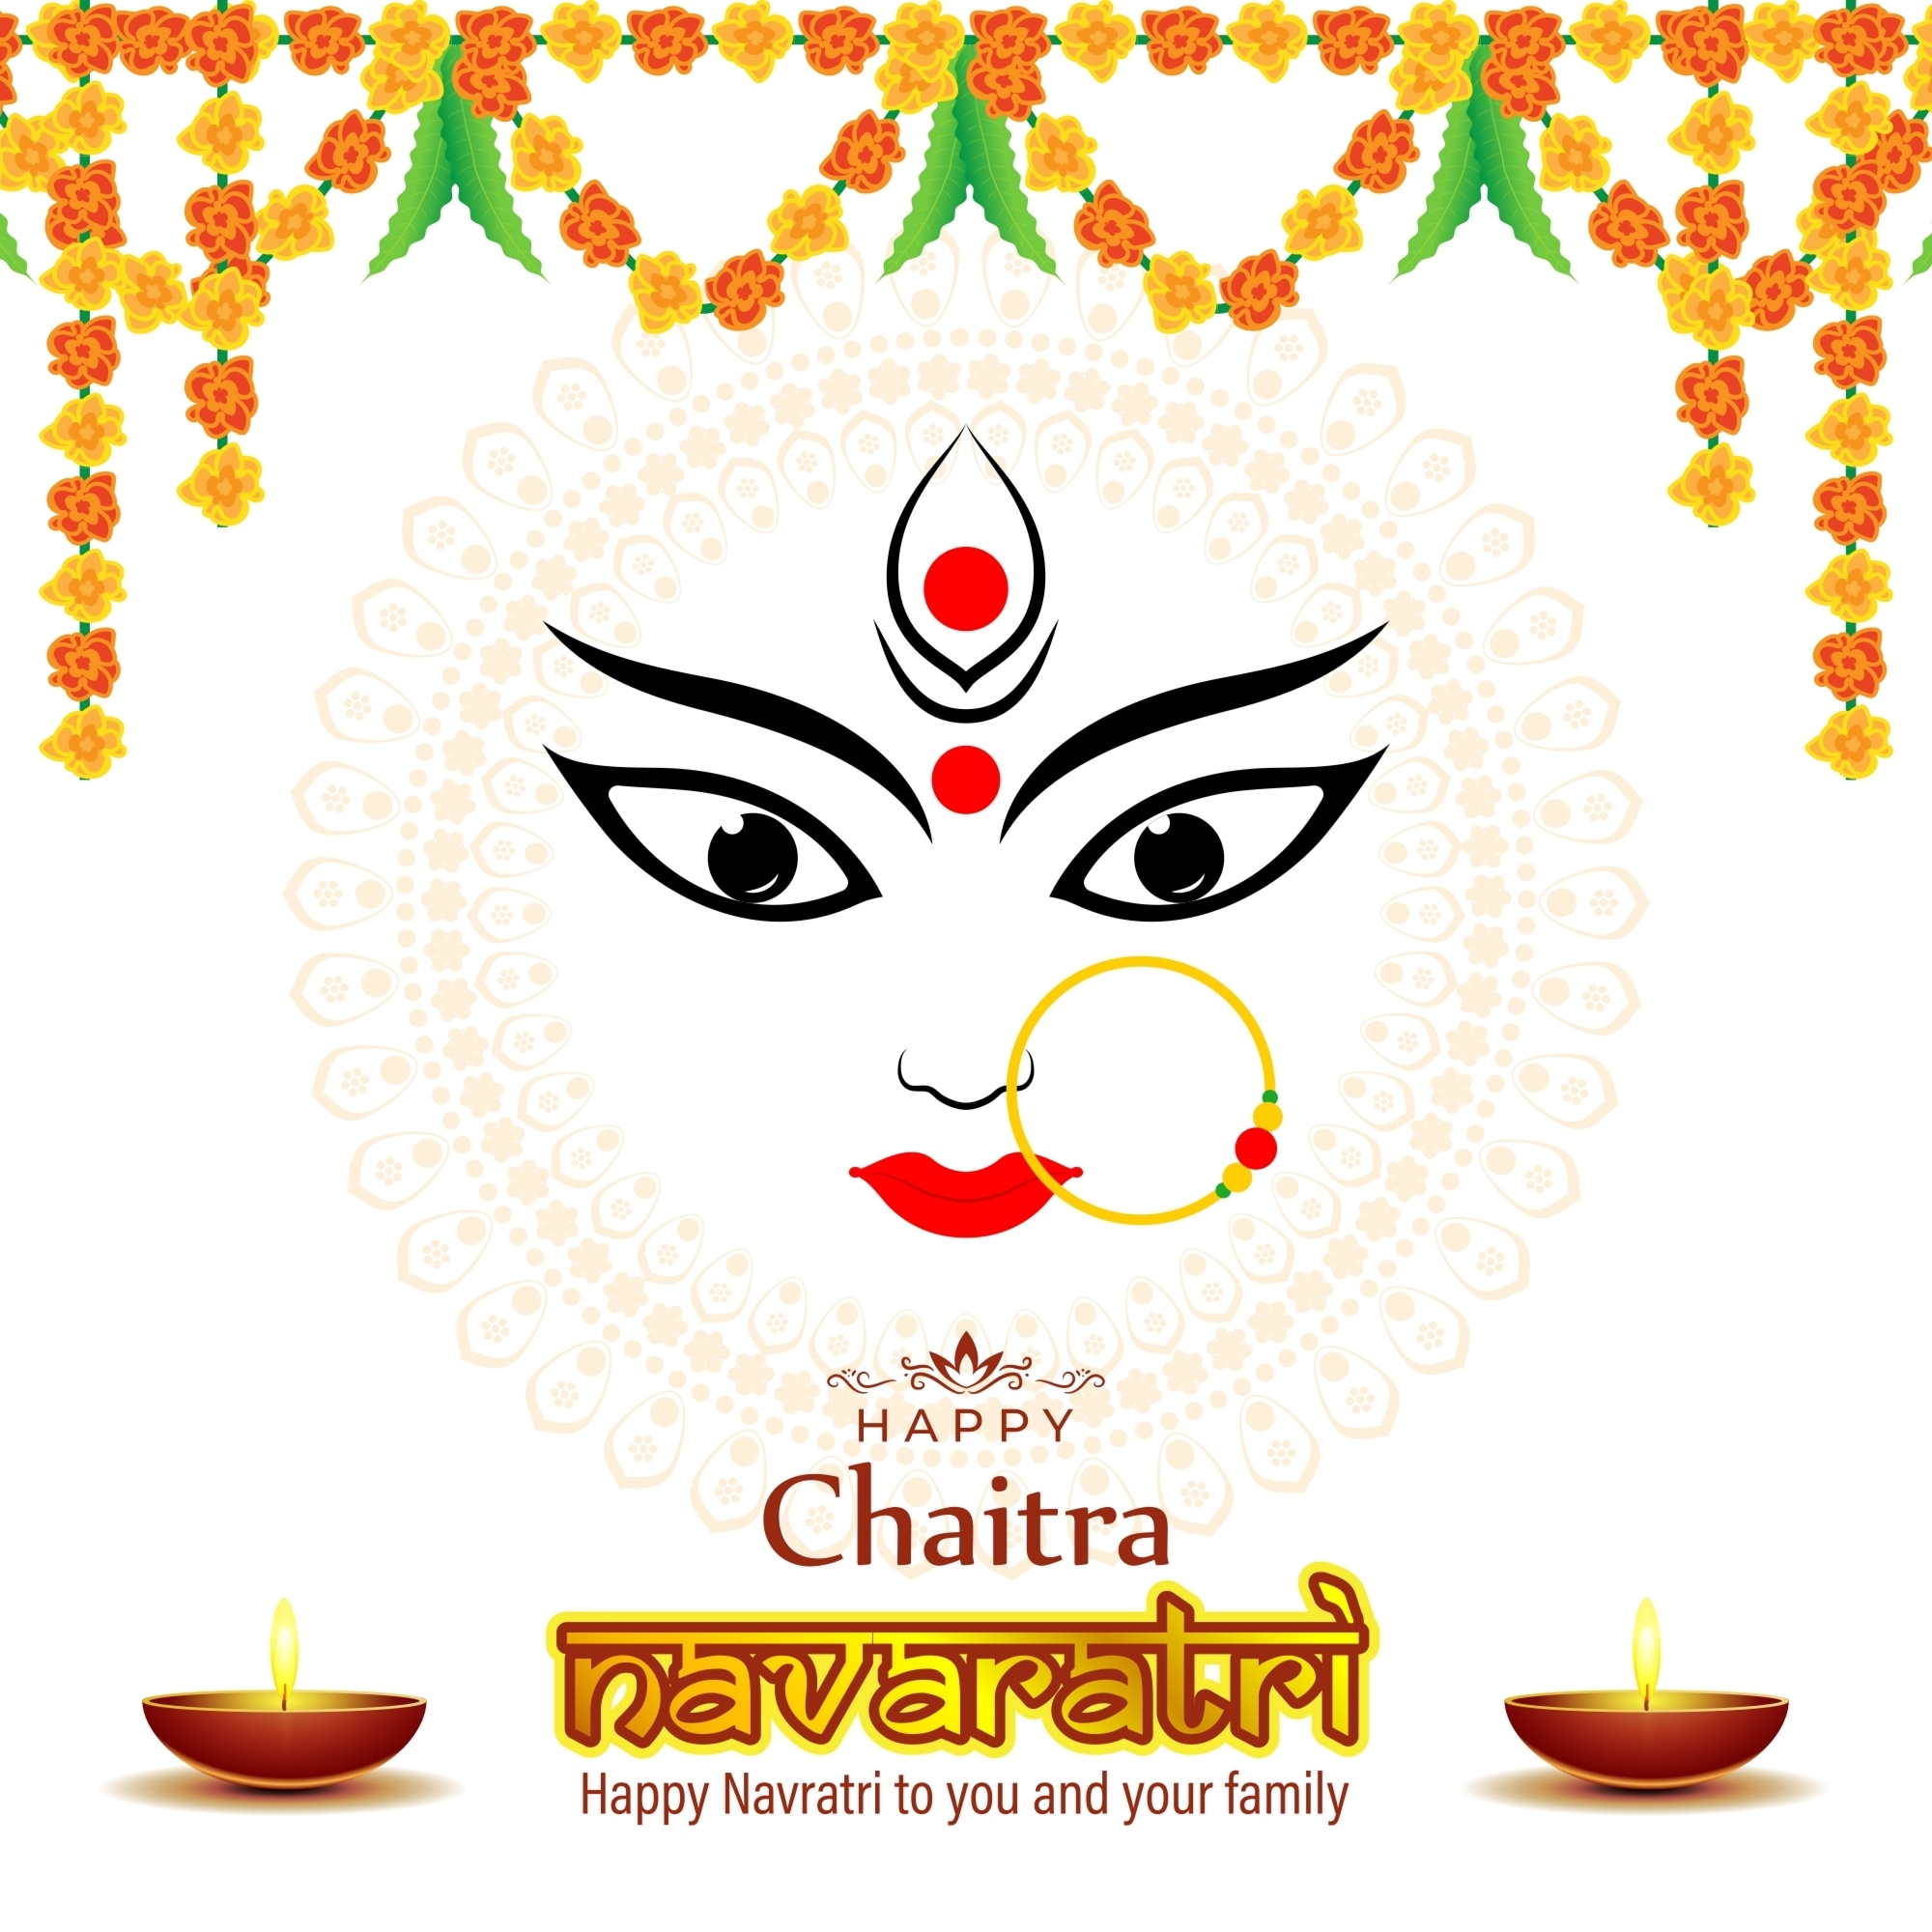 Happy Chaitra Navratri 2022 Wishes, Images, Status, Quotes, Messages